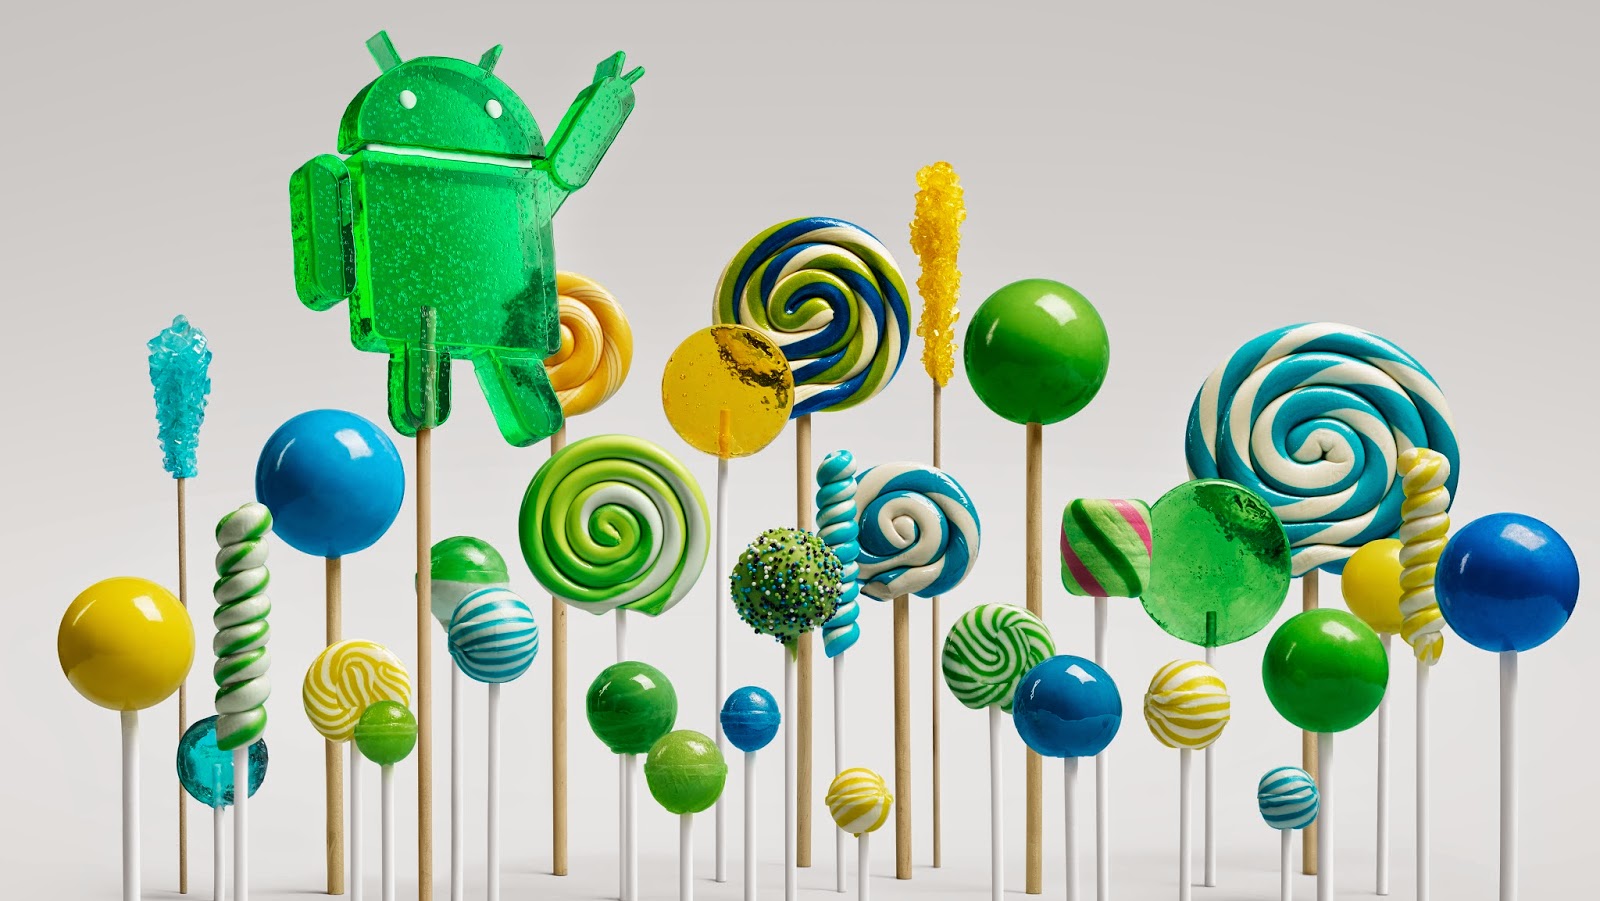 Android Lollipop - Google's sweetest release to date